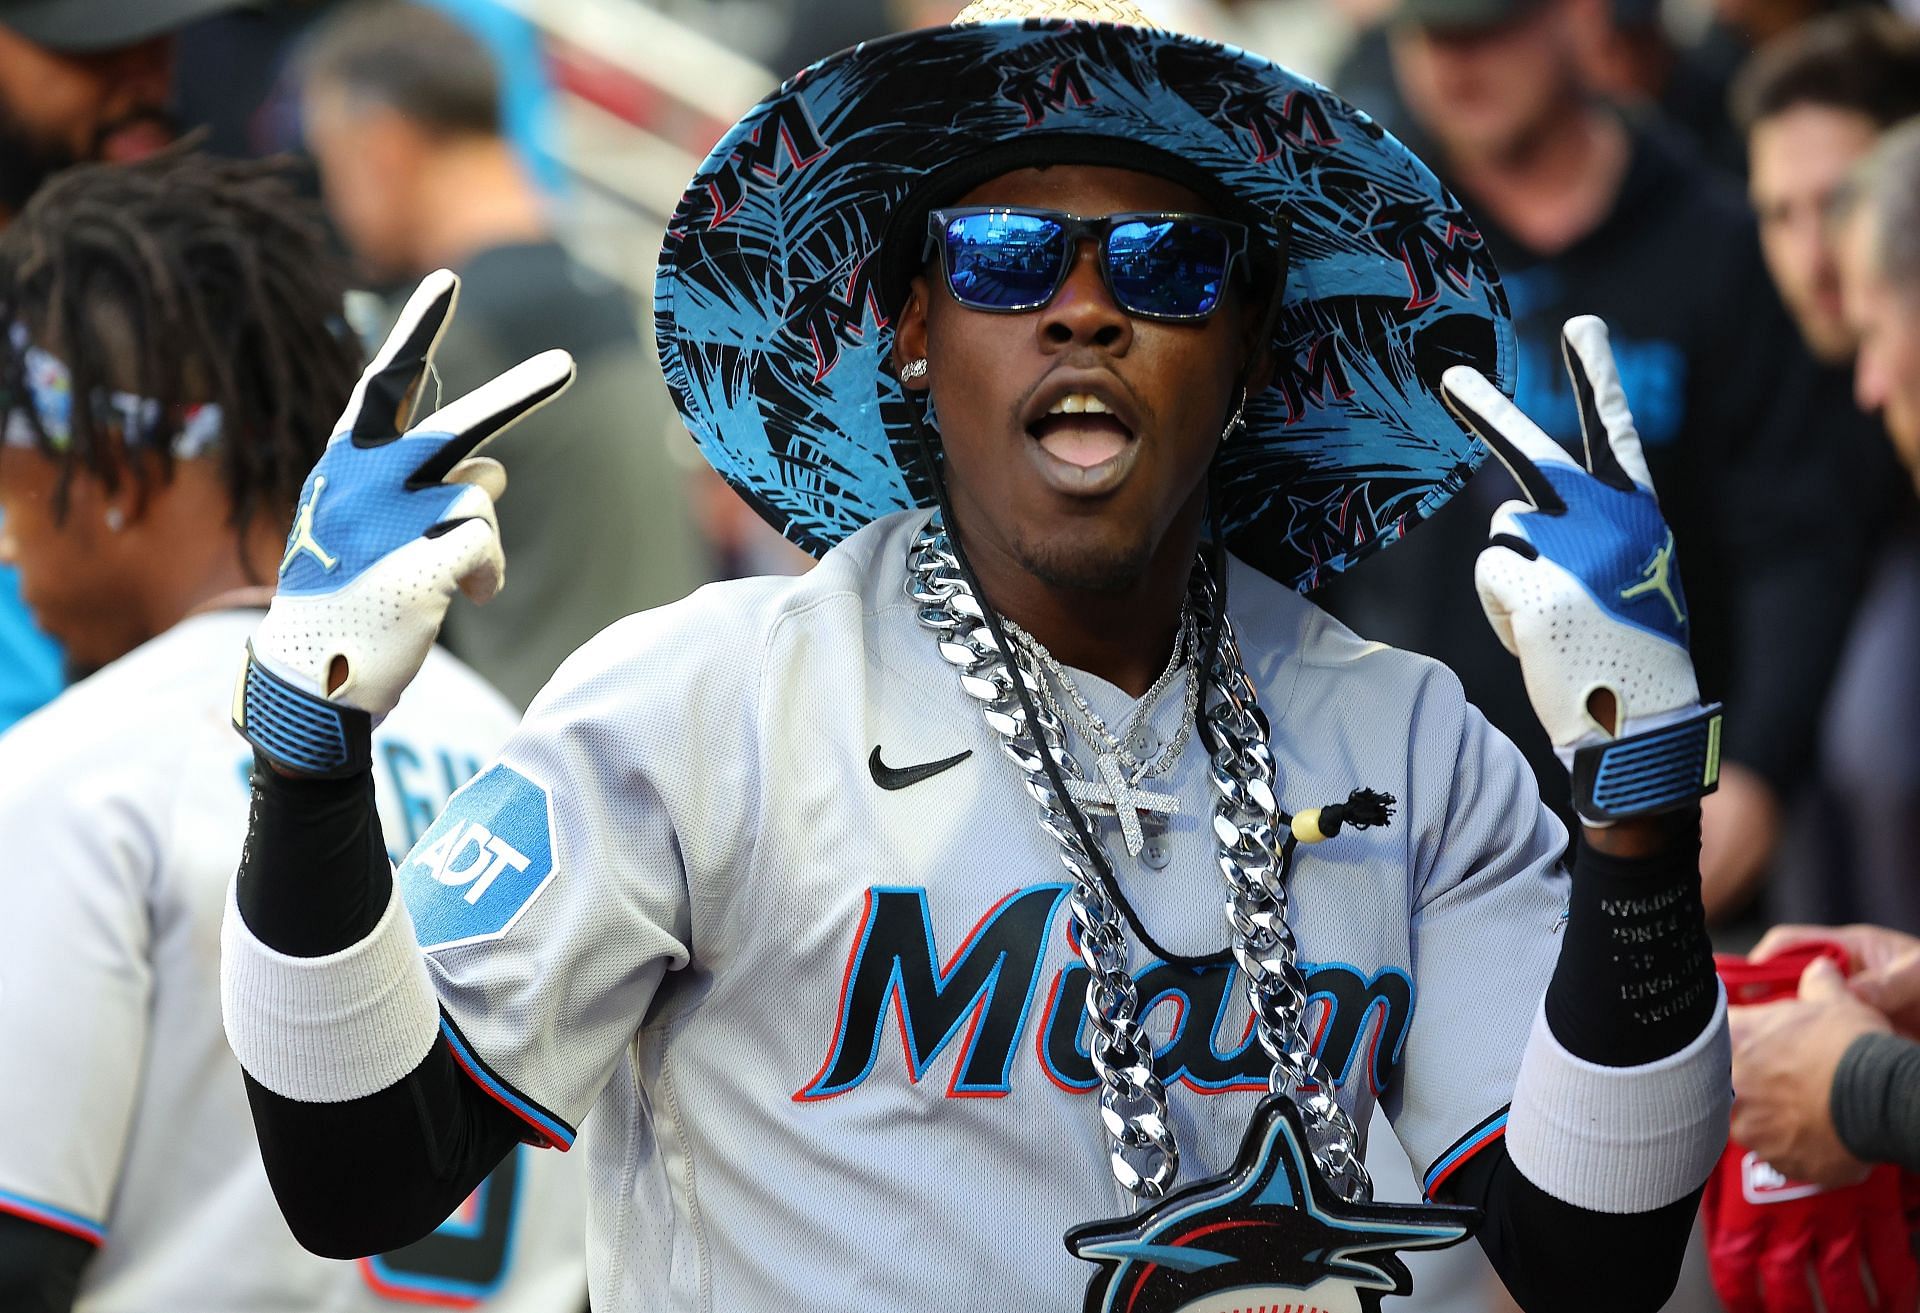 Jazz Chisholm Jr. of the Miami Marlins celebrates after hitting a solo homer.